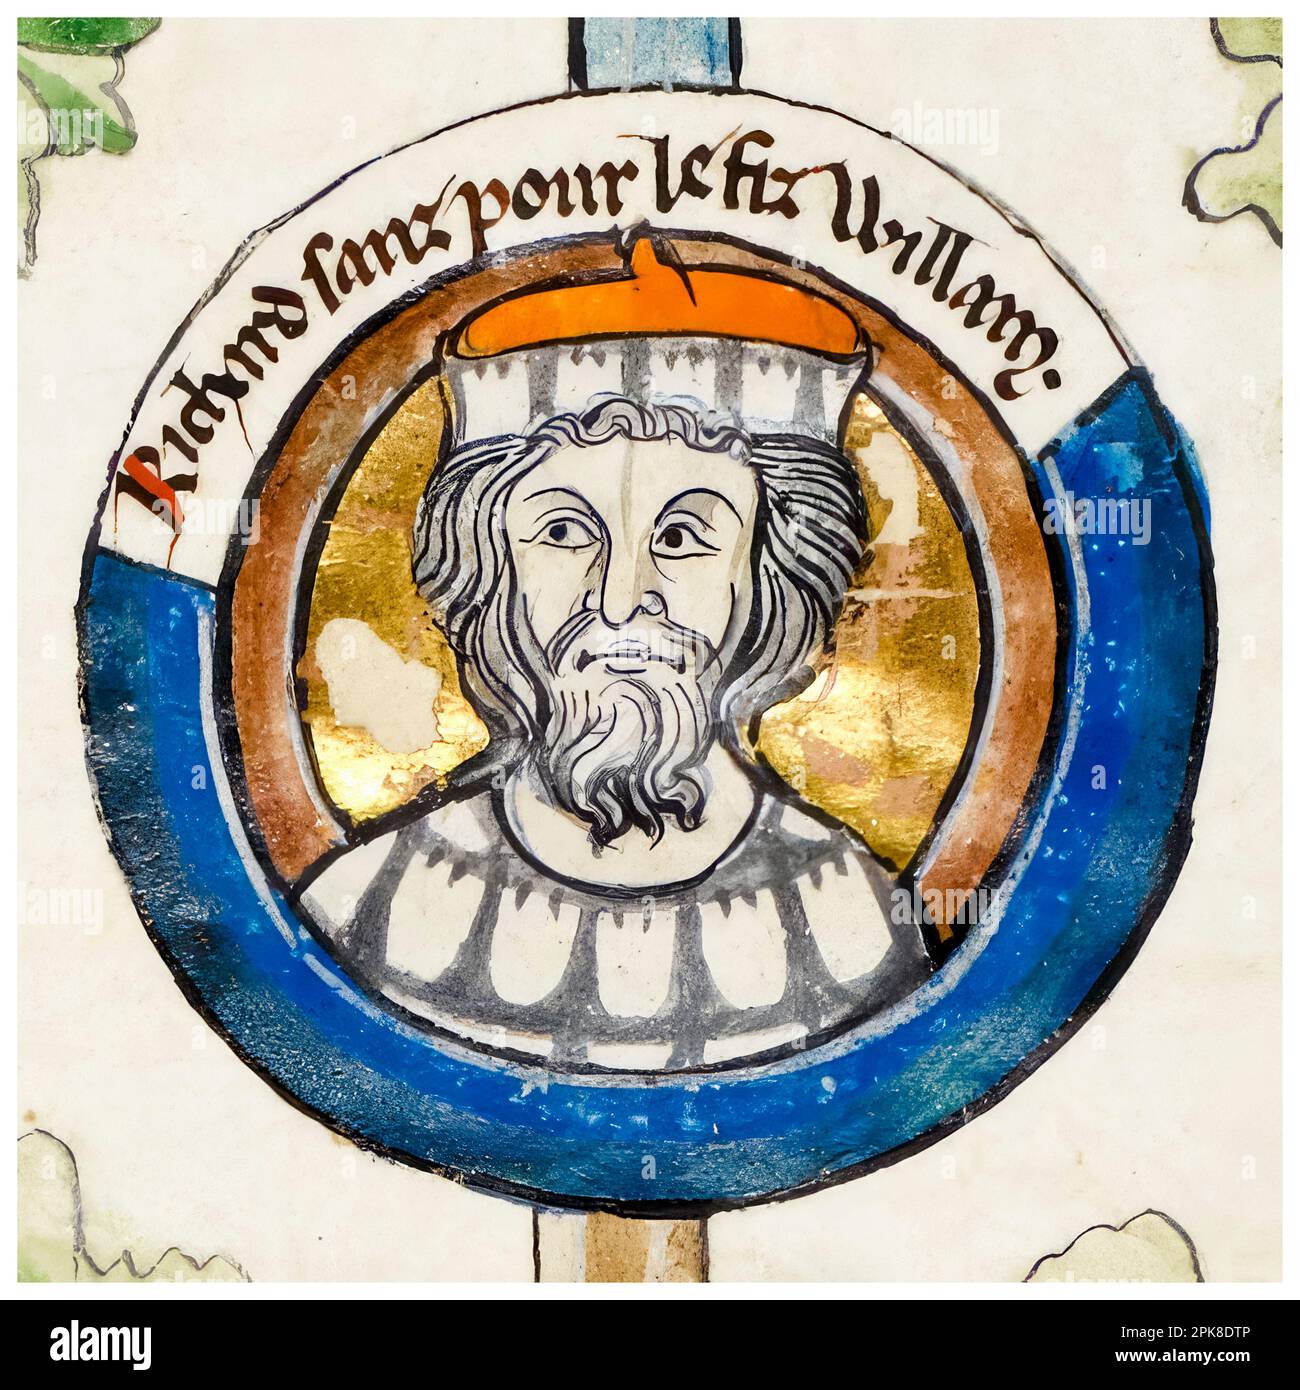 Richard I of Normandy (932-996), also known as Richard the Fearless was the Count of Rouen (942-996), illuminated manuscript portrait painting, before 1399 Stock Photo